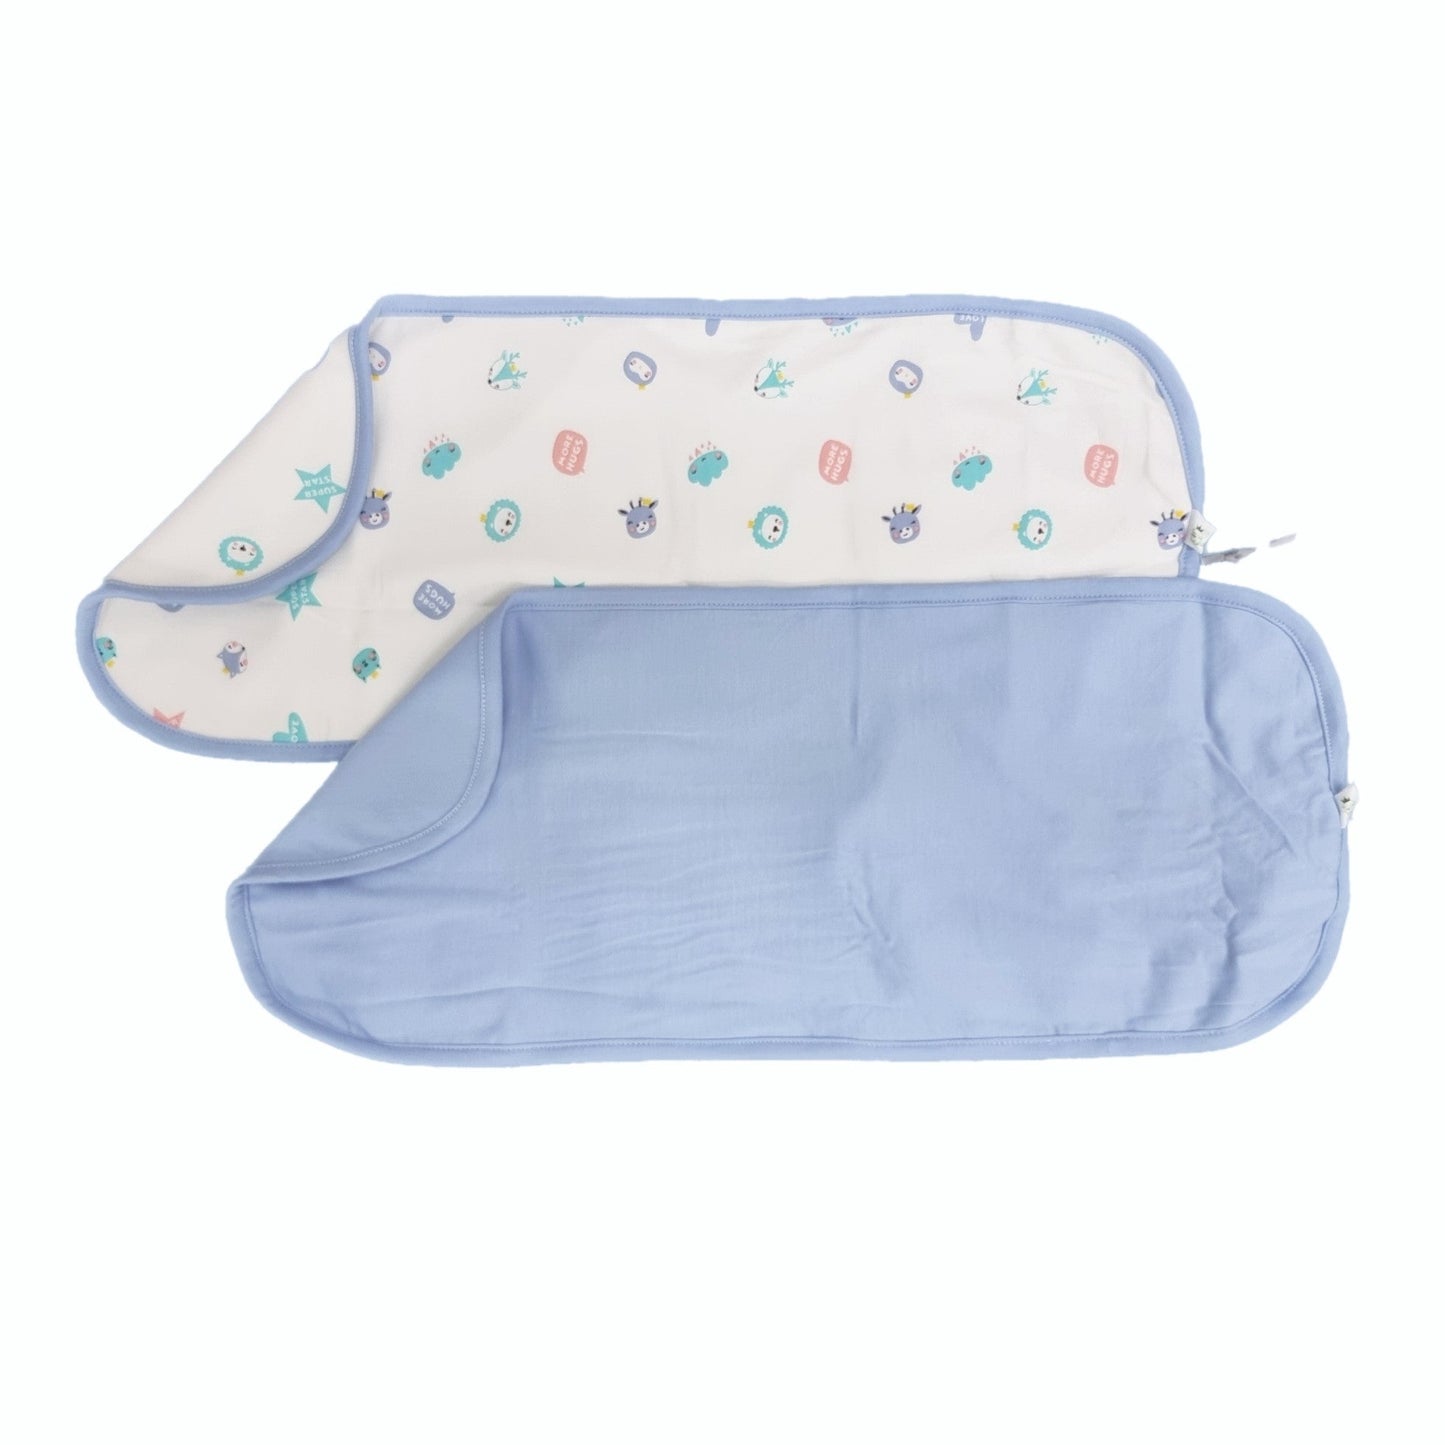 Superstar - Baby Bamboo Burp Cloths (Pack of 2)